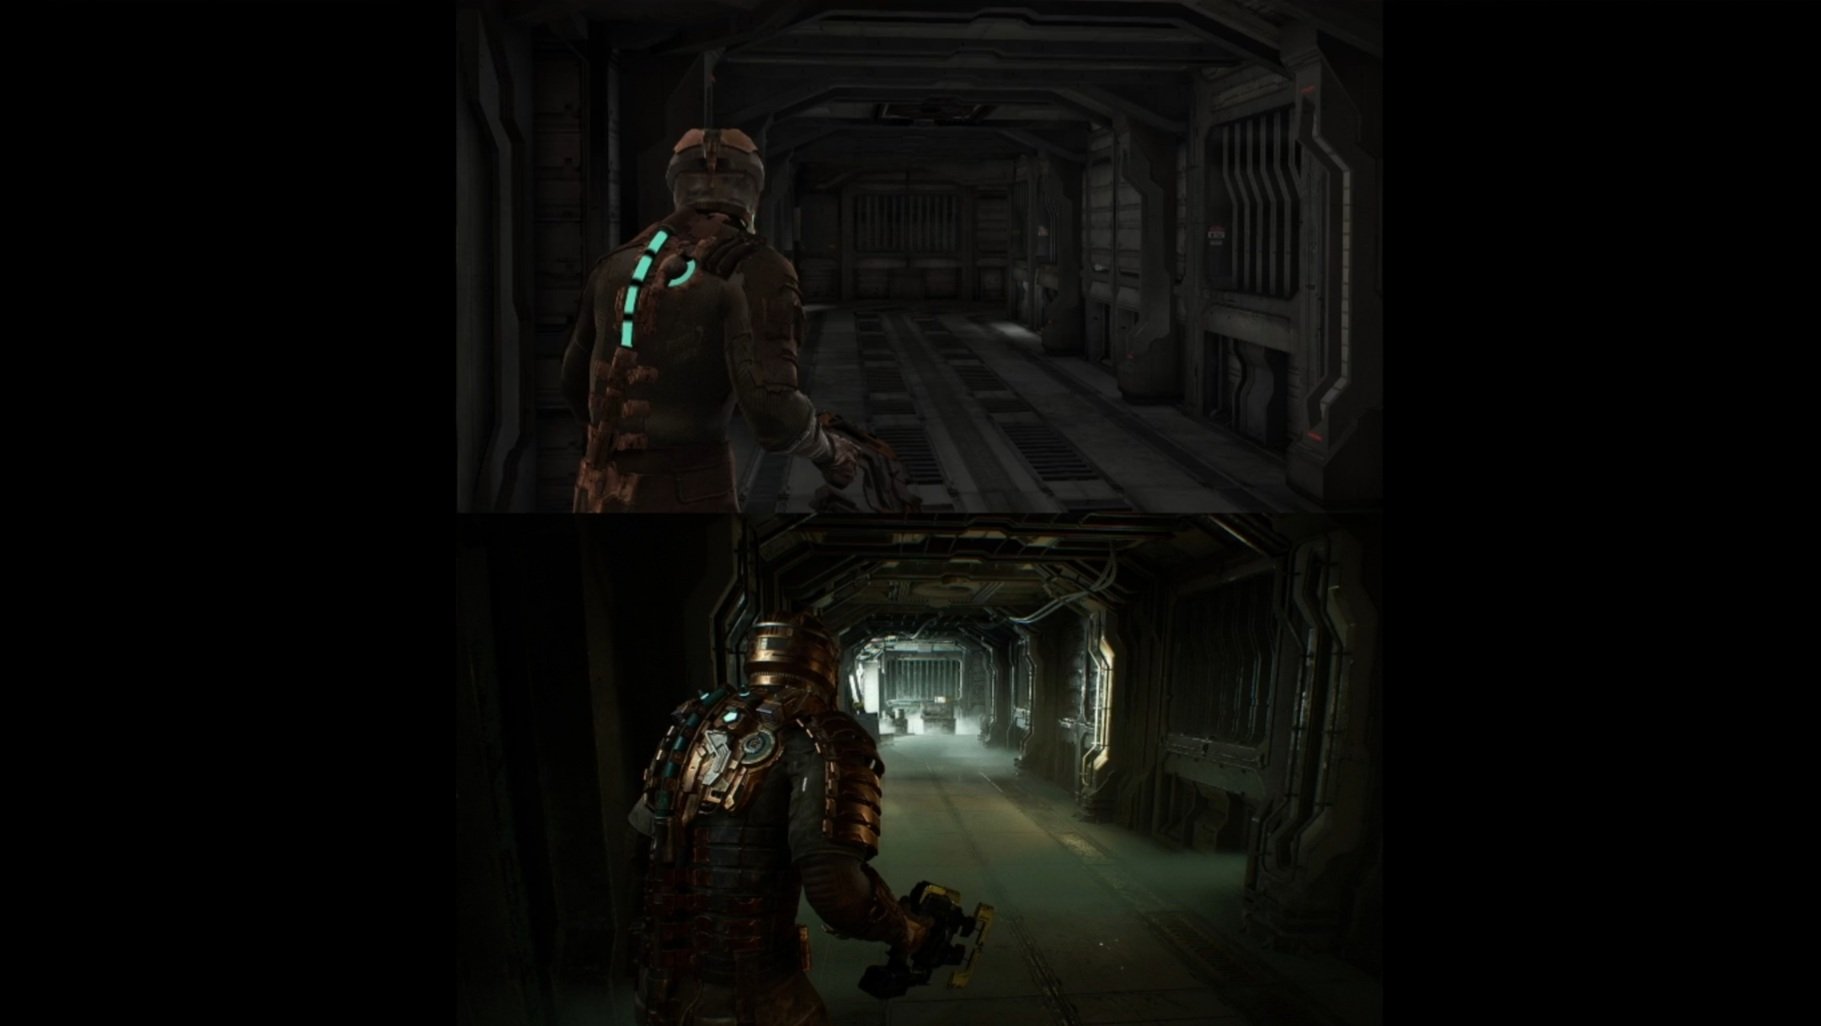 Dead Space Remake Expands Narrative and Includes Lore from Rest of